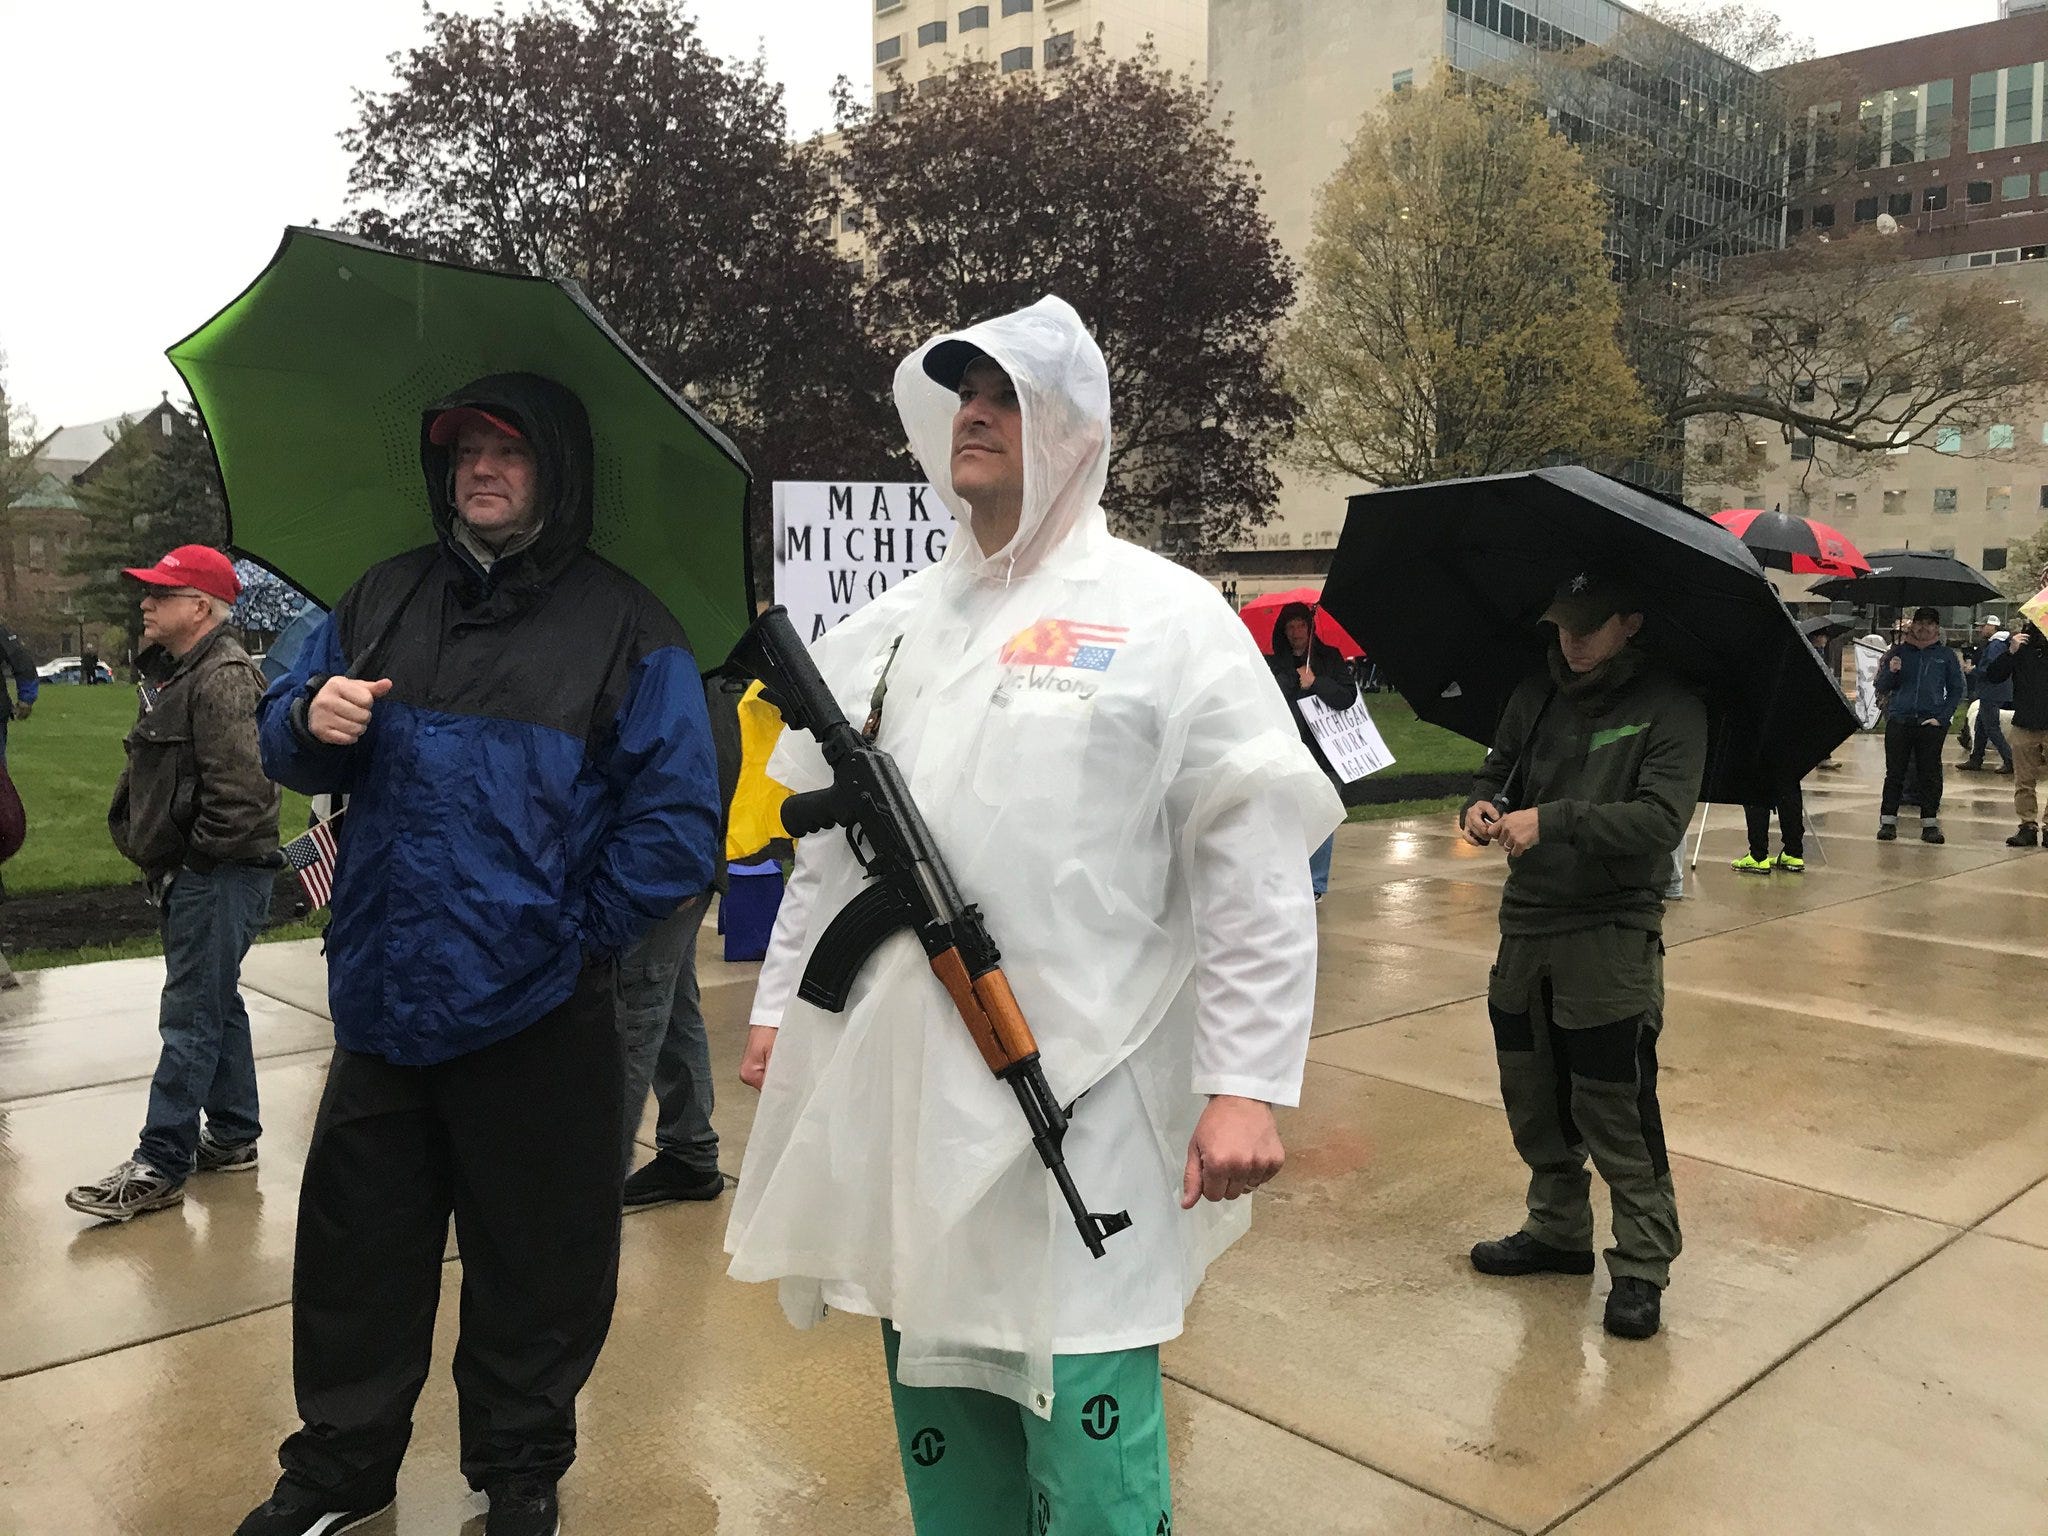 Craig Ladyman of Rockford also attended the April 30 protest and said the widespread attention on that protest has made the Lansing Capitol "the spearhead of the world in terms of our liberty." "Just as this coronavirus spreads so can liberty,” he said.